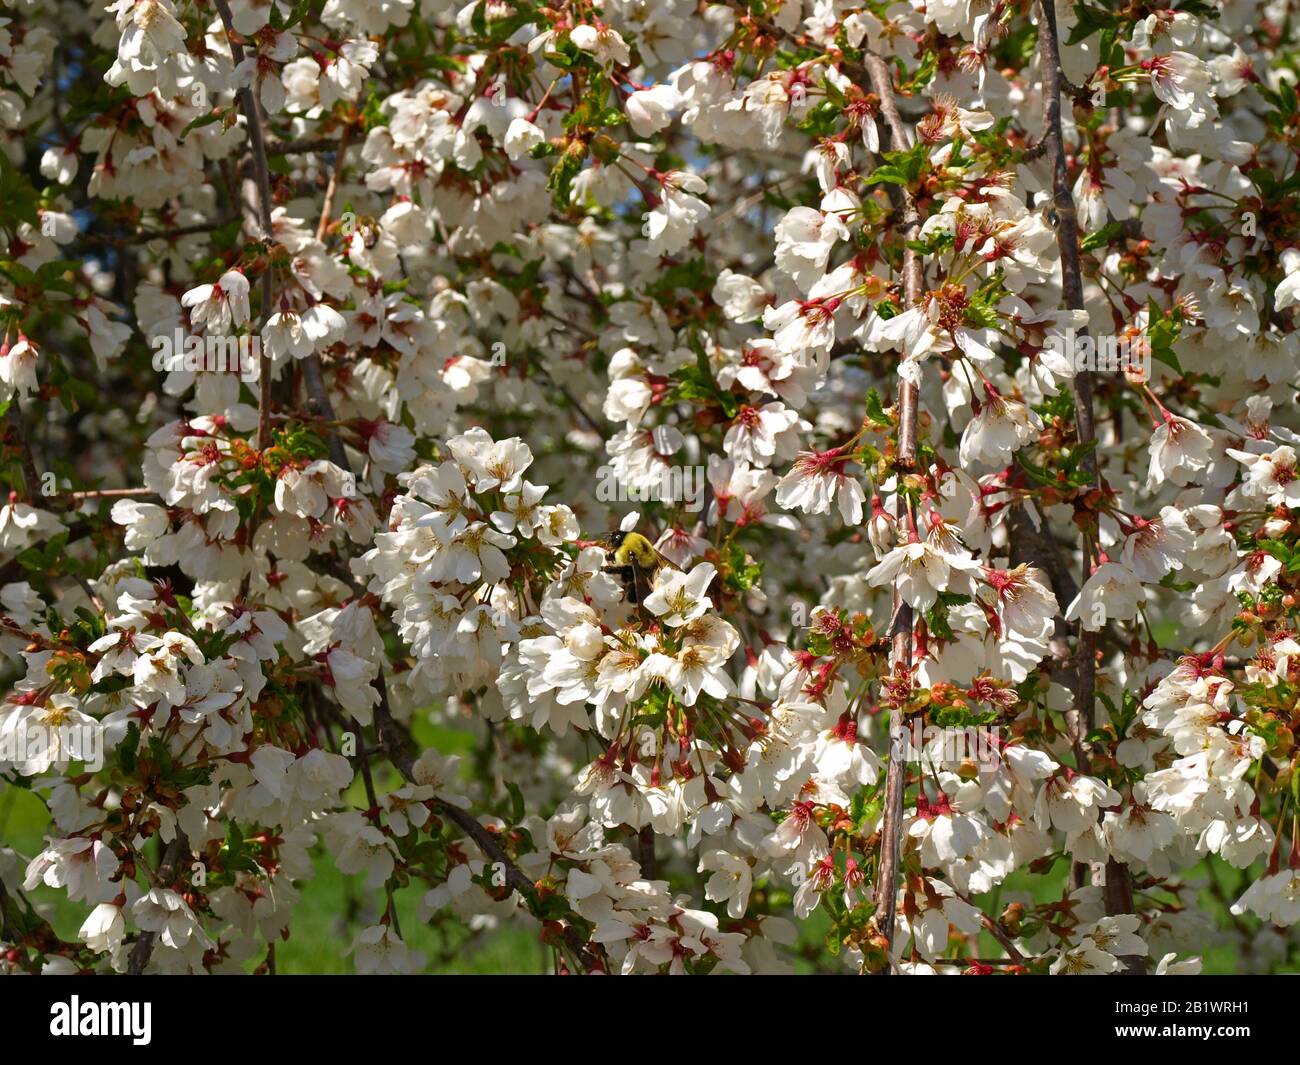 fruit and berry trees bloom in the spring Stock Photo